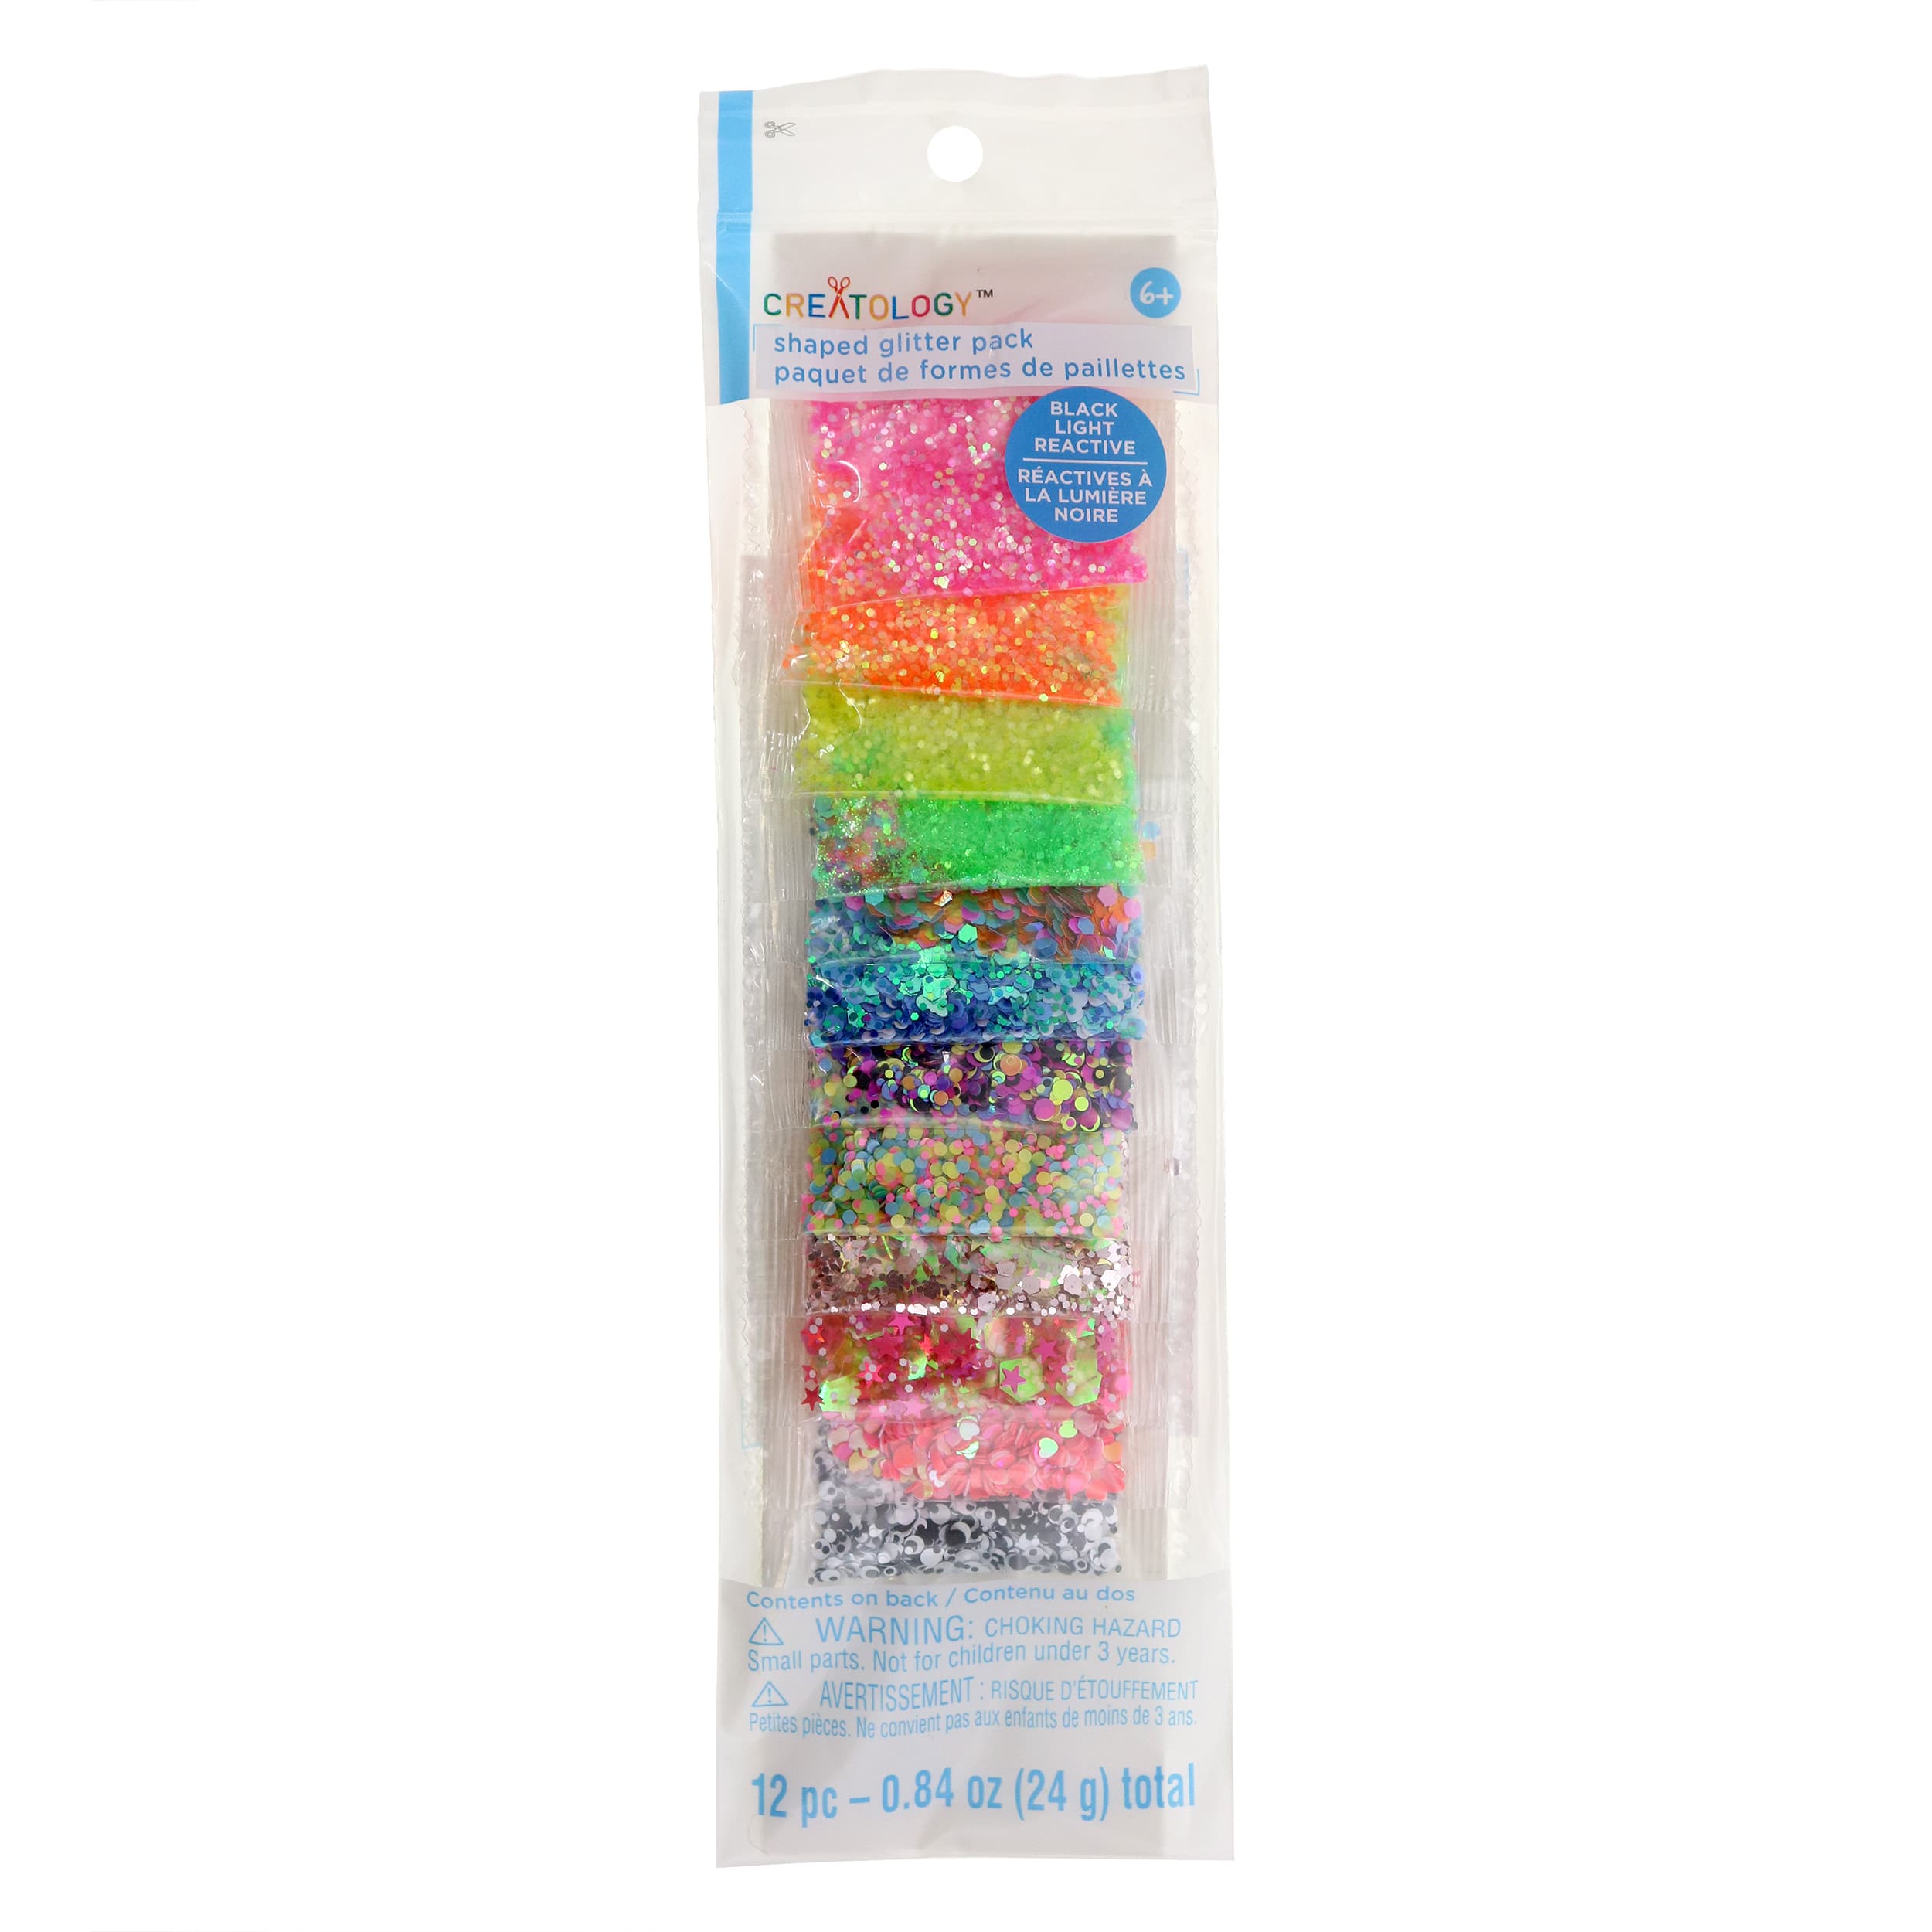 12 Packs: 12 Ct. (144 Total) Black Light Reactive Shaped Glitter by Creatology, Size: 0.84